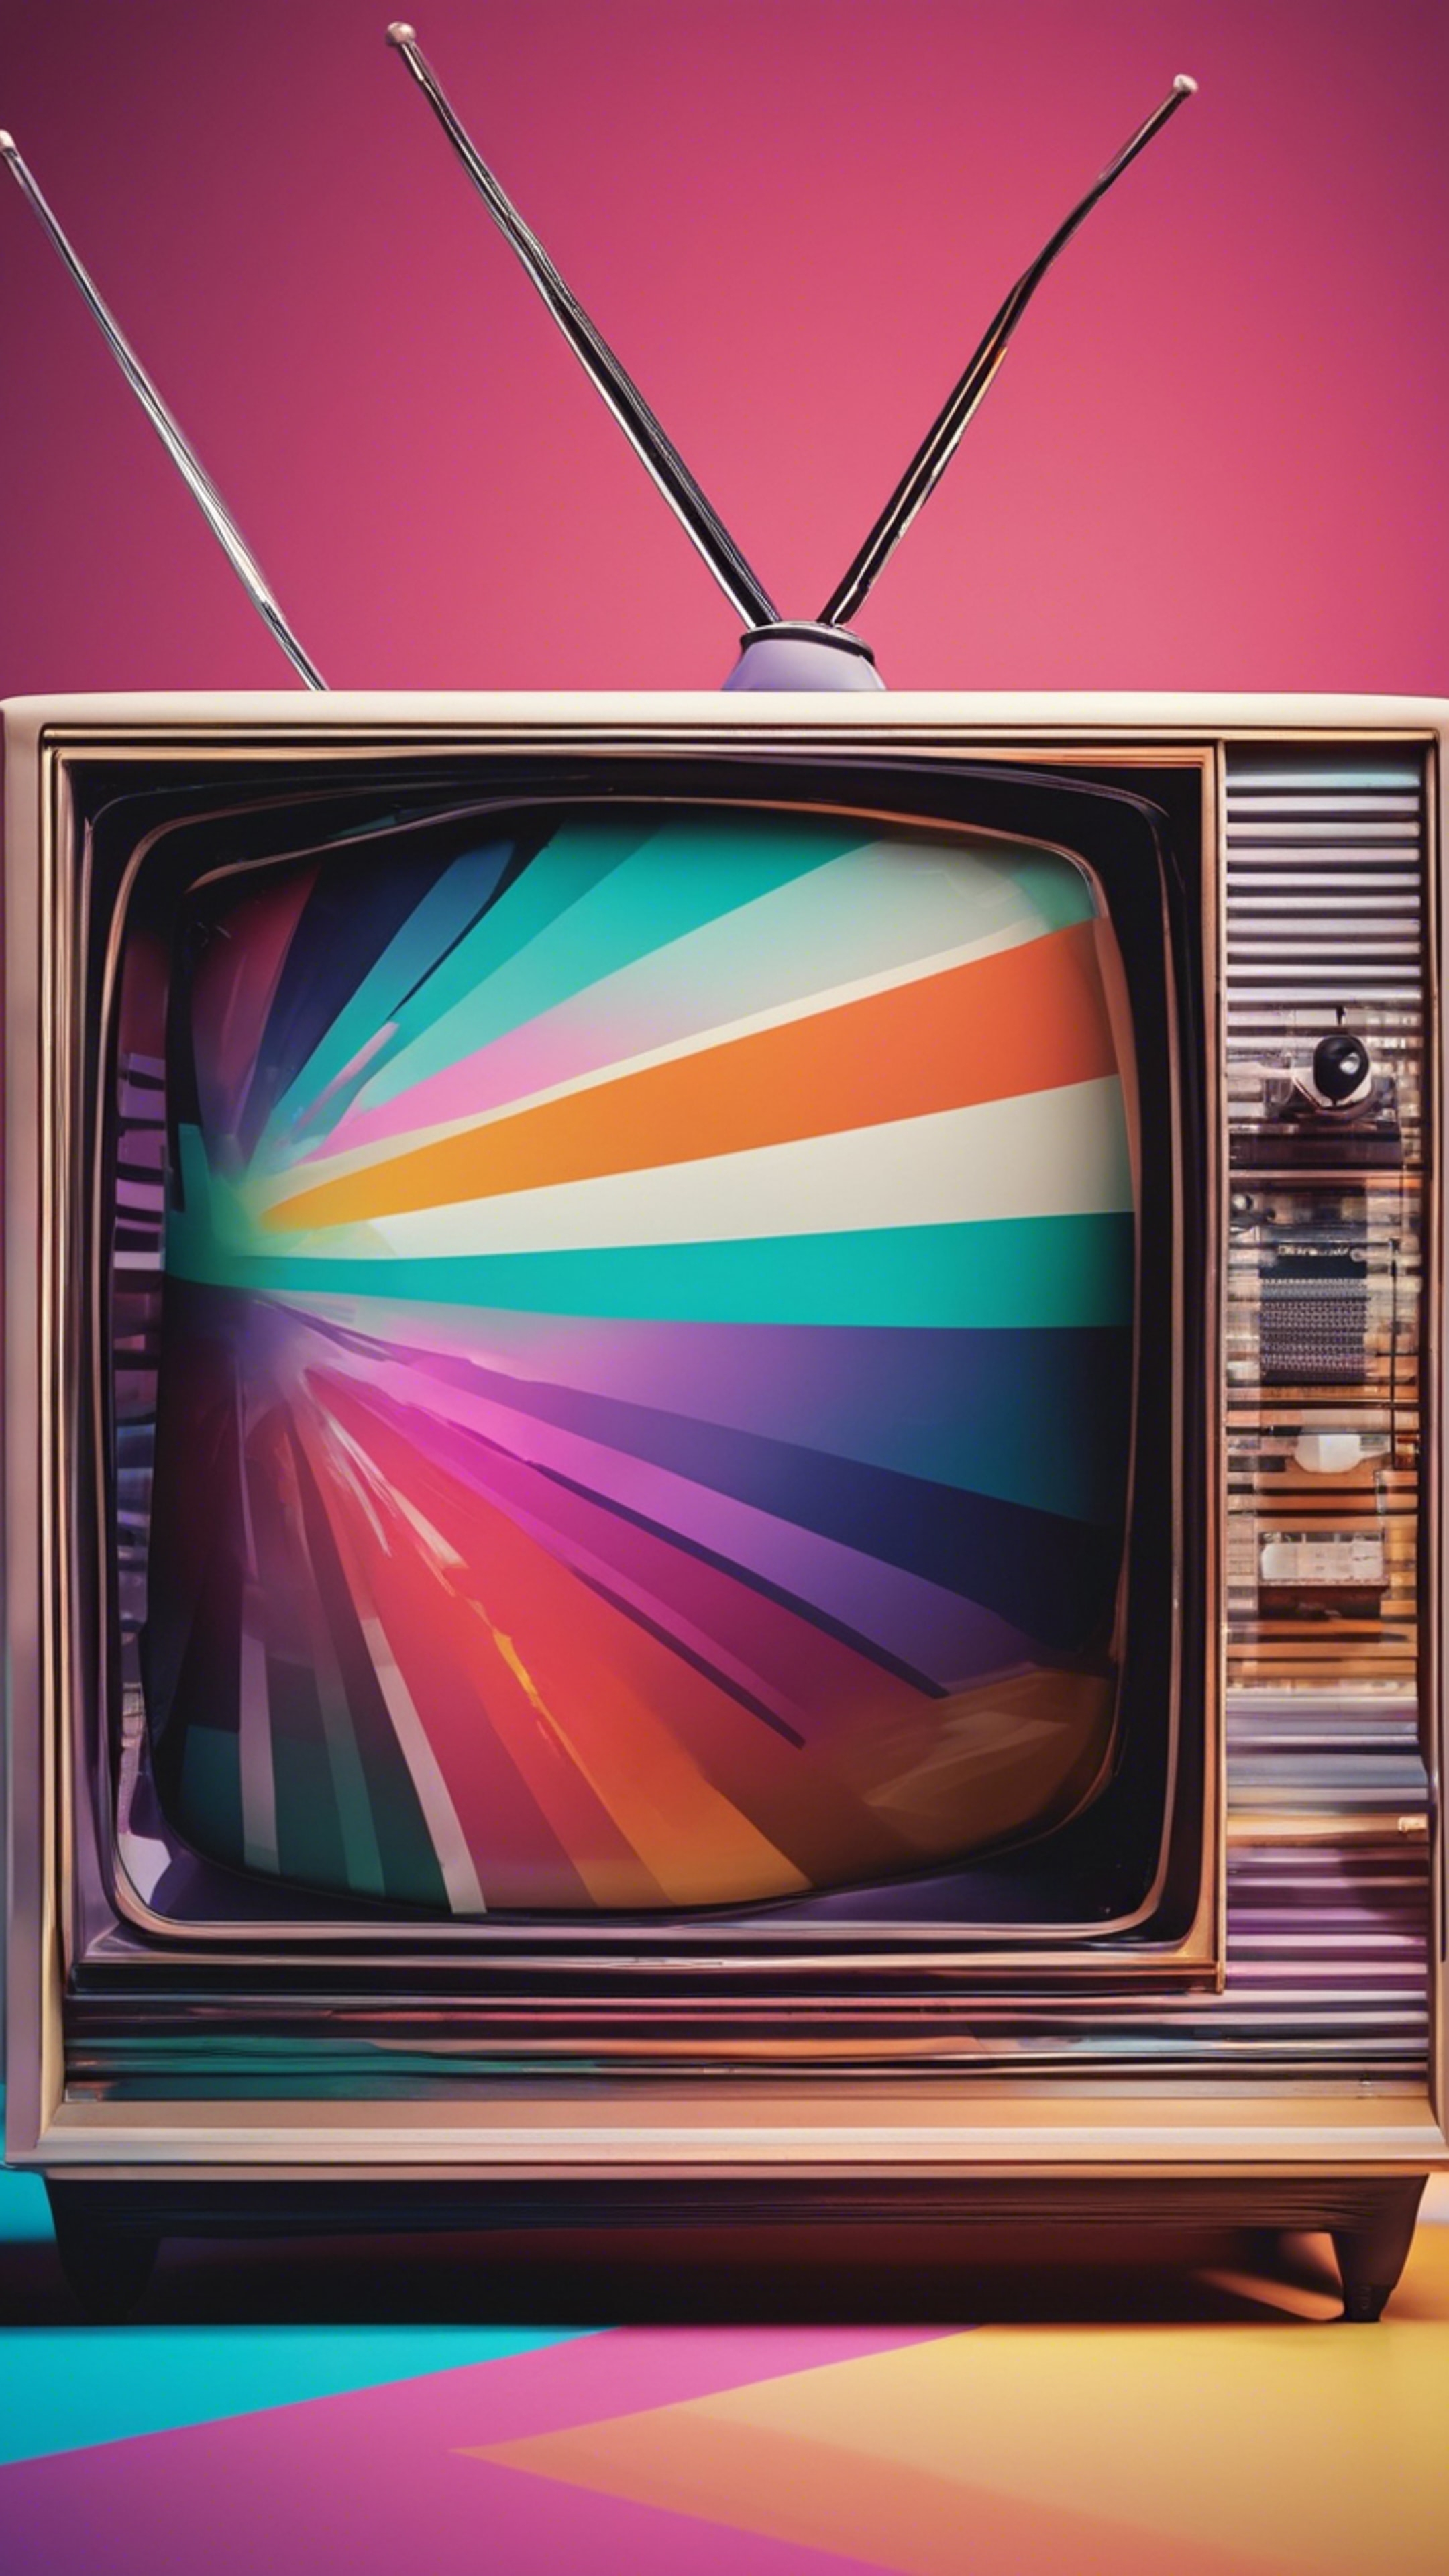 An image in the pop art style of a retro television set, brightly colored and exaggerated.壁紙[7675ef7e8b8d4c108de9]